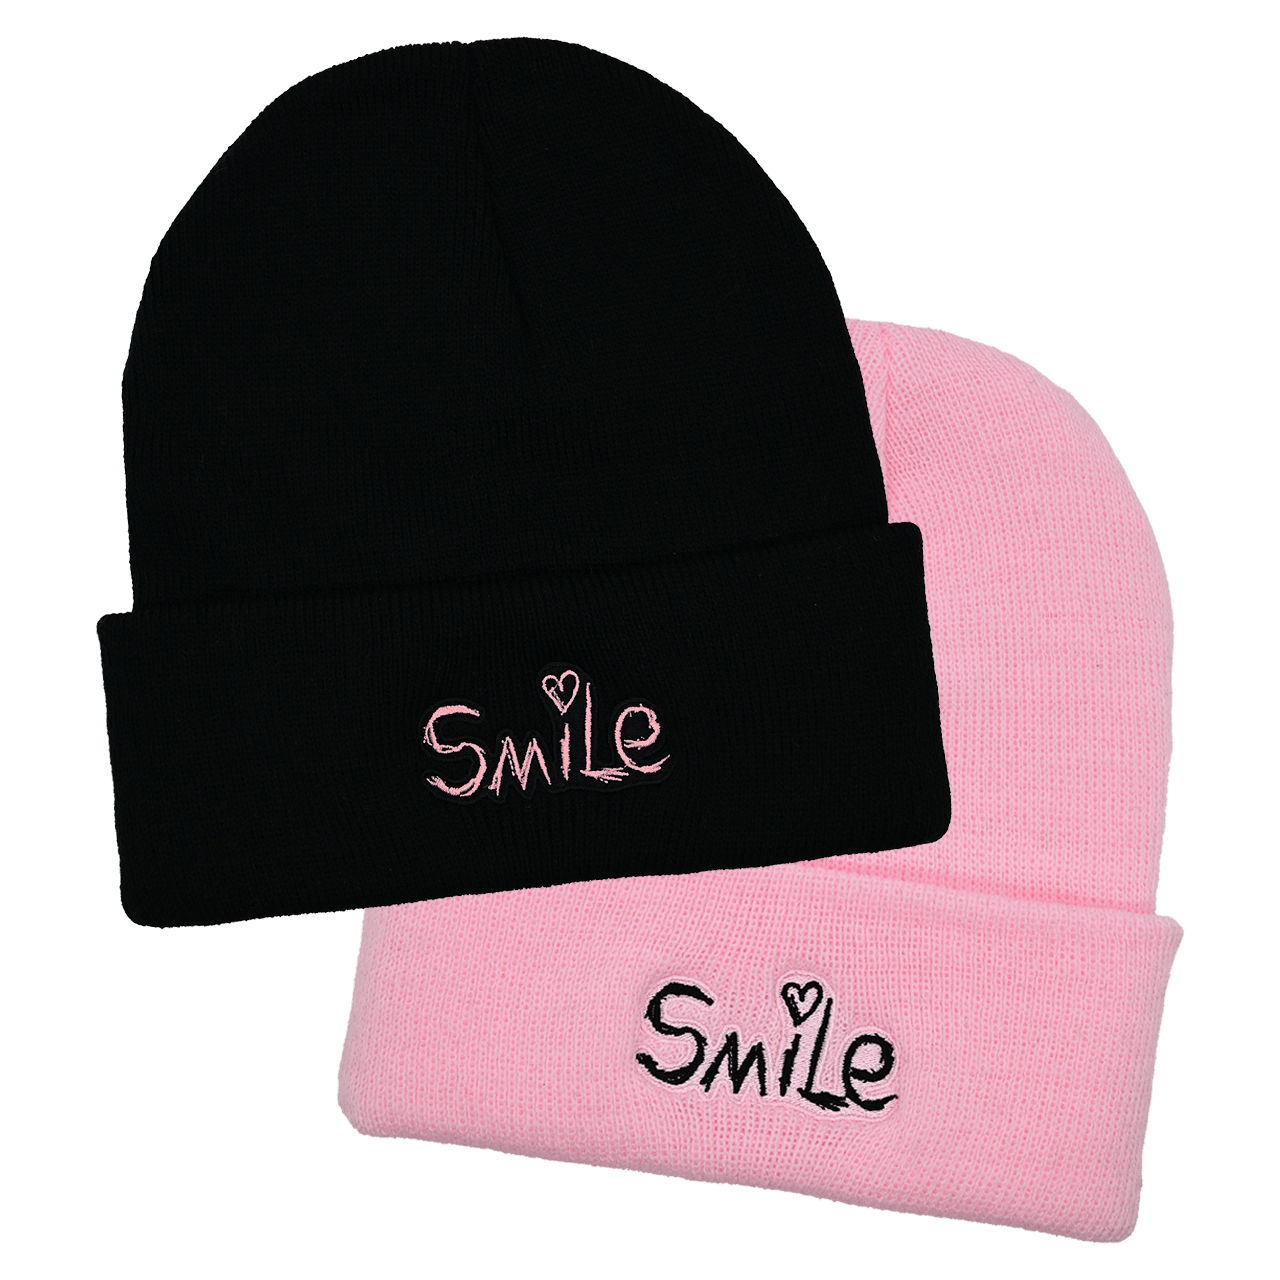 Dream February MEMBERS ONLY Love Your Smile Cuffed Beanie